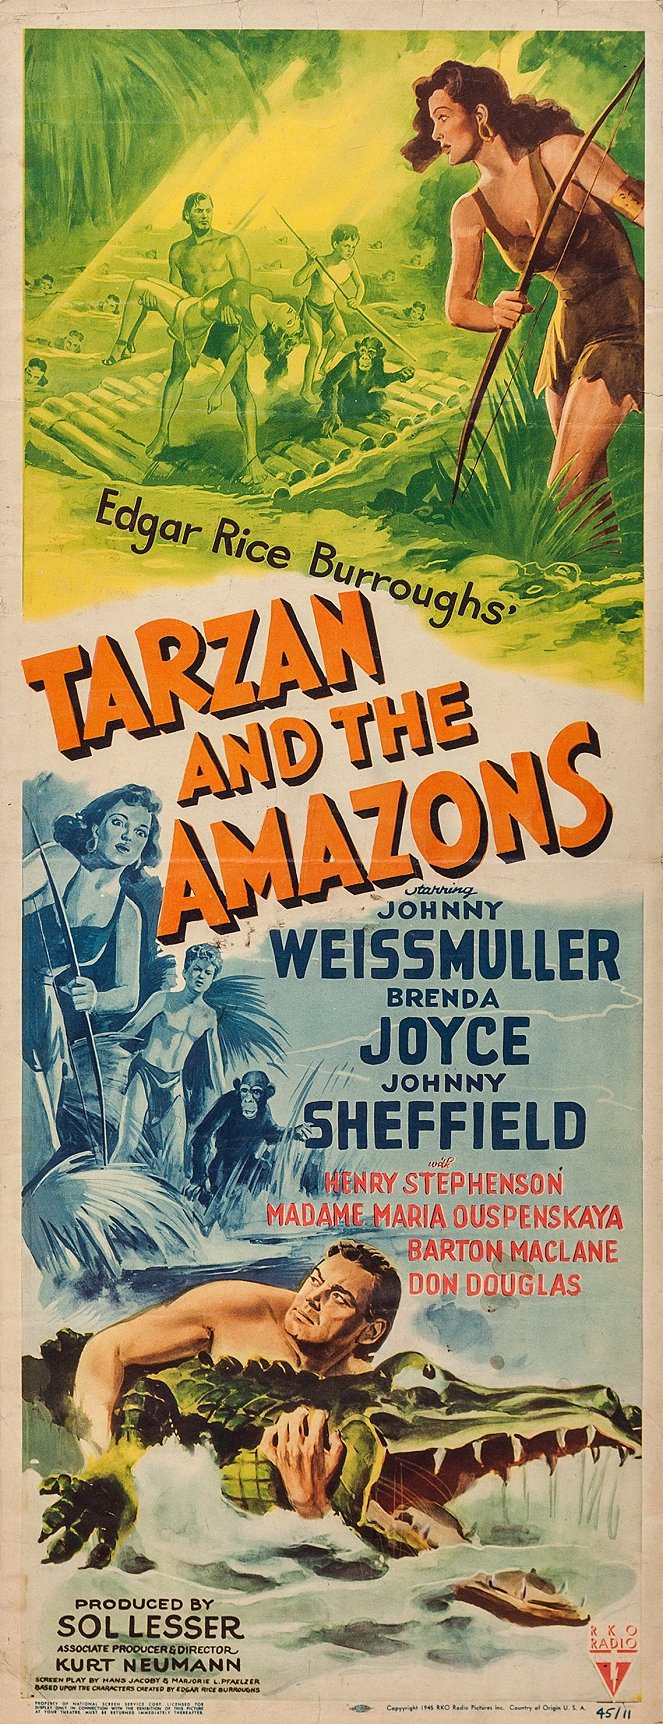 Tarzan and the Amazons - Posters